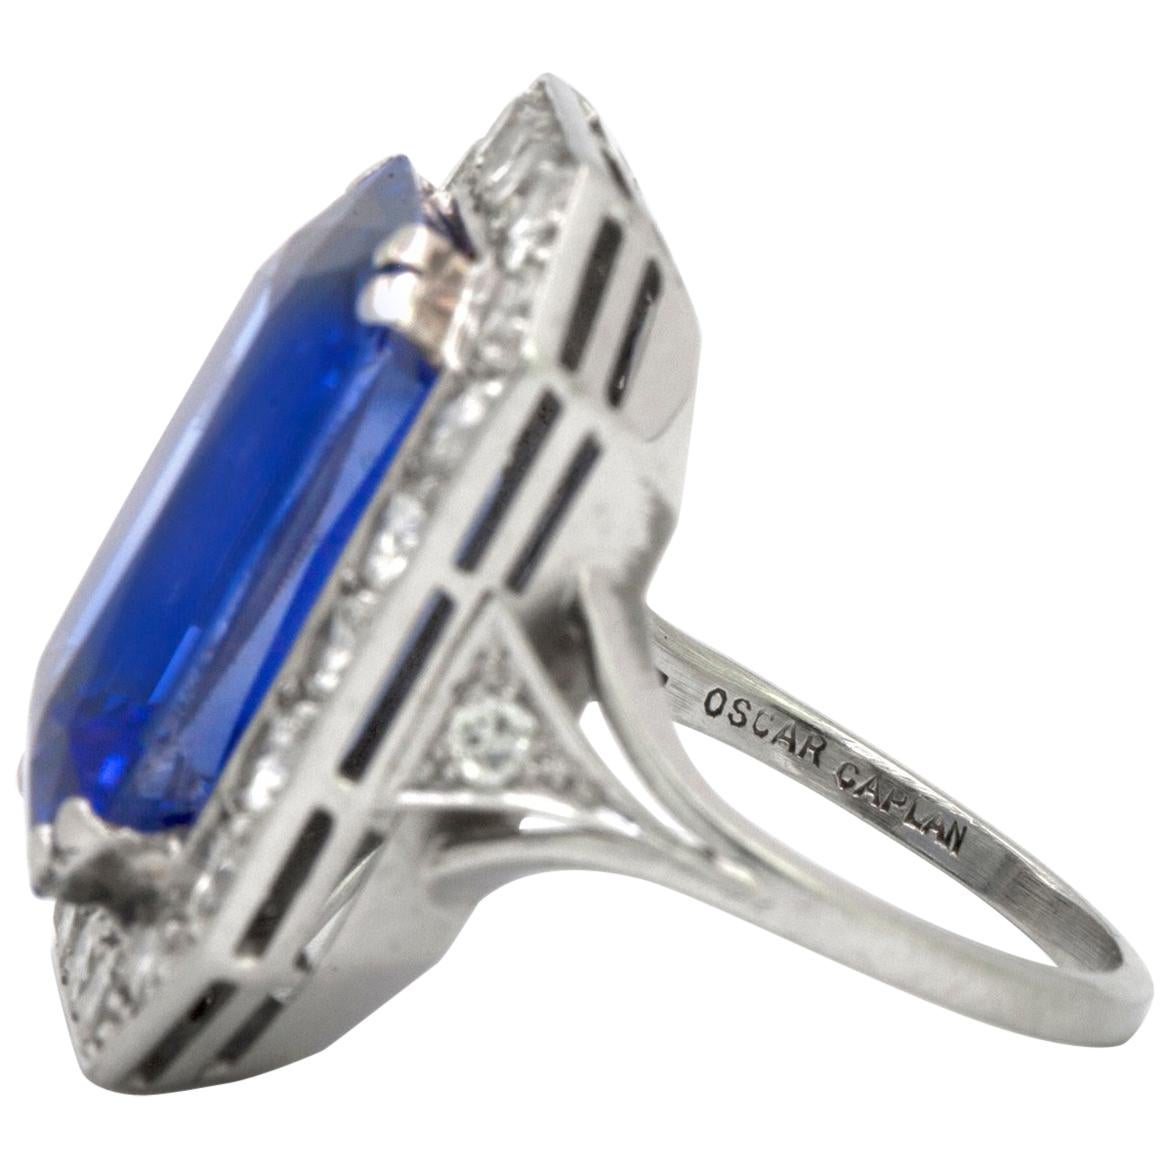 A Synthetic Sapphire classic octagonal cocktail ring with a rich blue Synthetic Sapphire which weighs approximately 12.50 cts, surrounded by 22 round brilliant cut diamonds that have an approximate total weight of 1.50 cts, that have been set in 18k